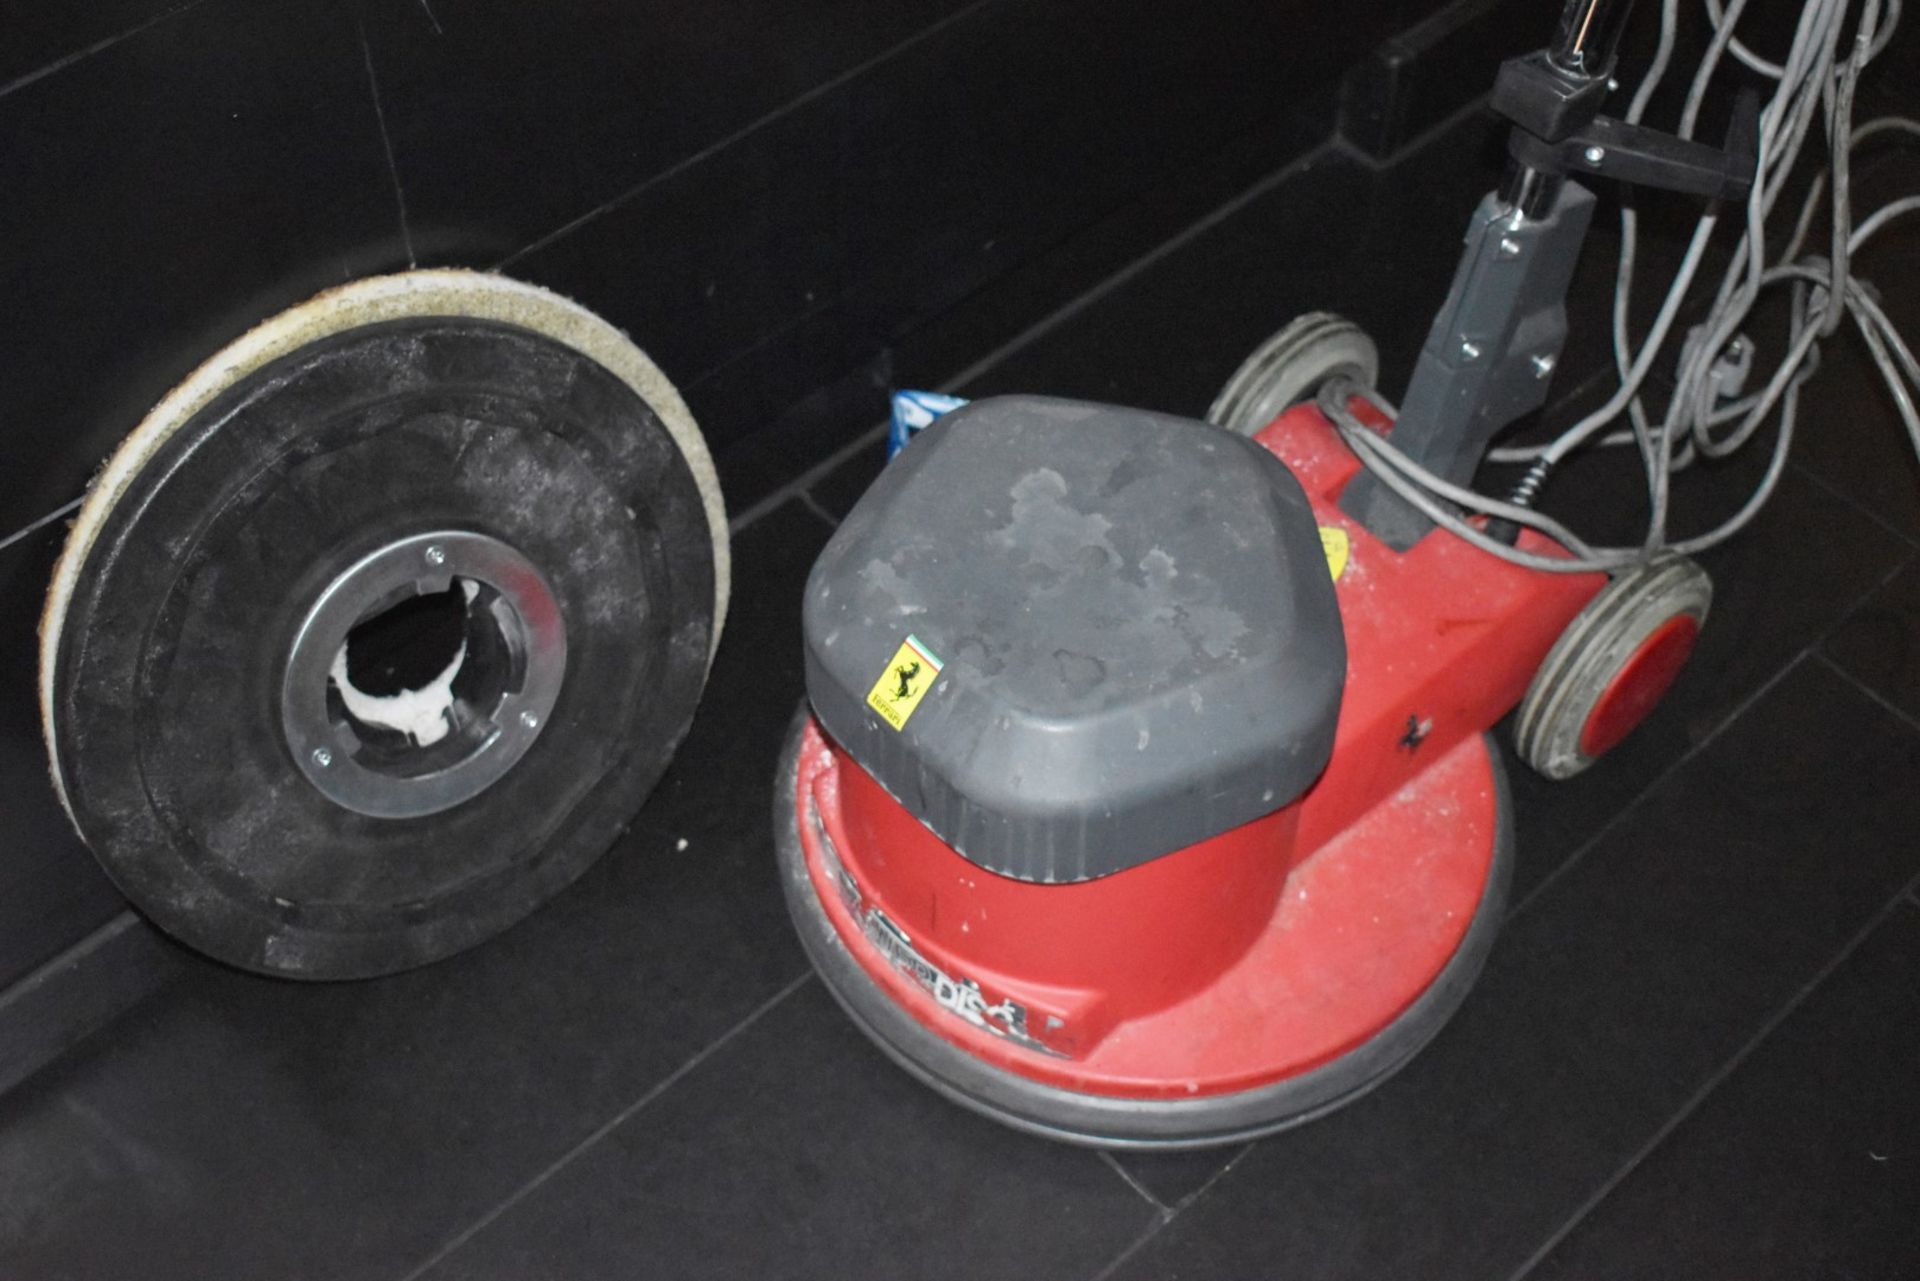 1 x Cleanfix 'POWER DISC 165' Commercial Floor Cleaner - Swiss Made - CL392 - Ref LD176 1F - - Image 6 of 6